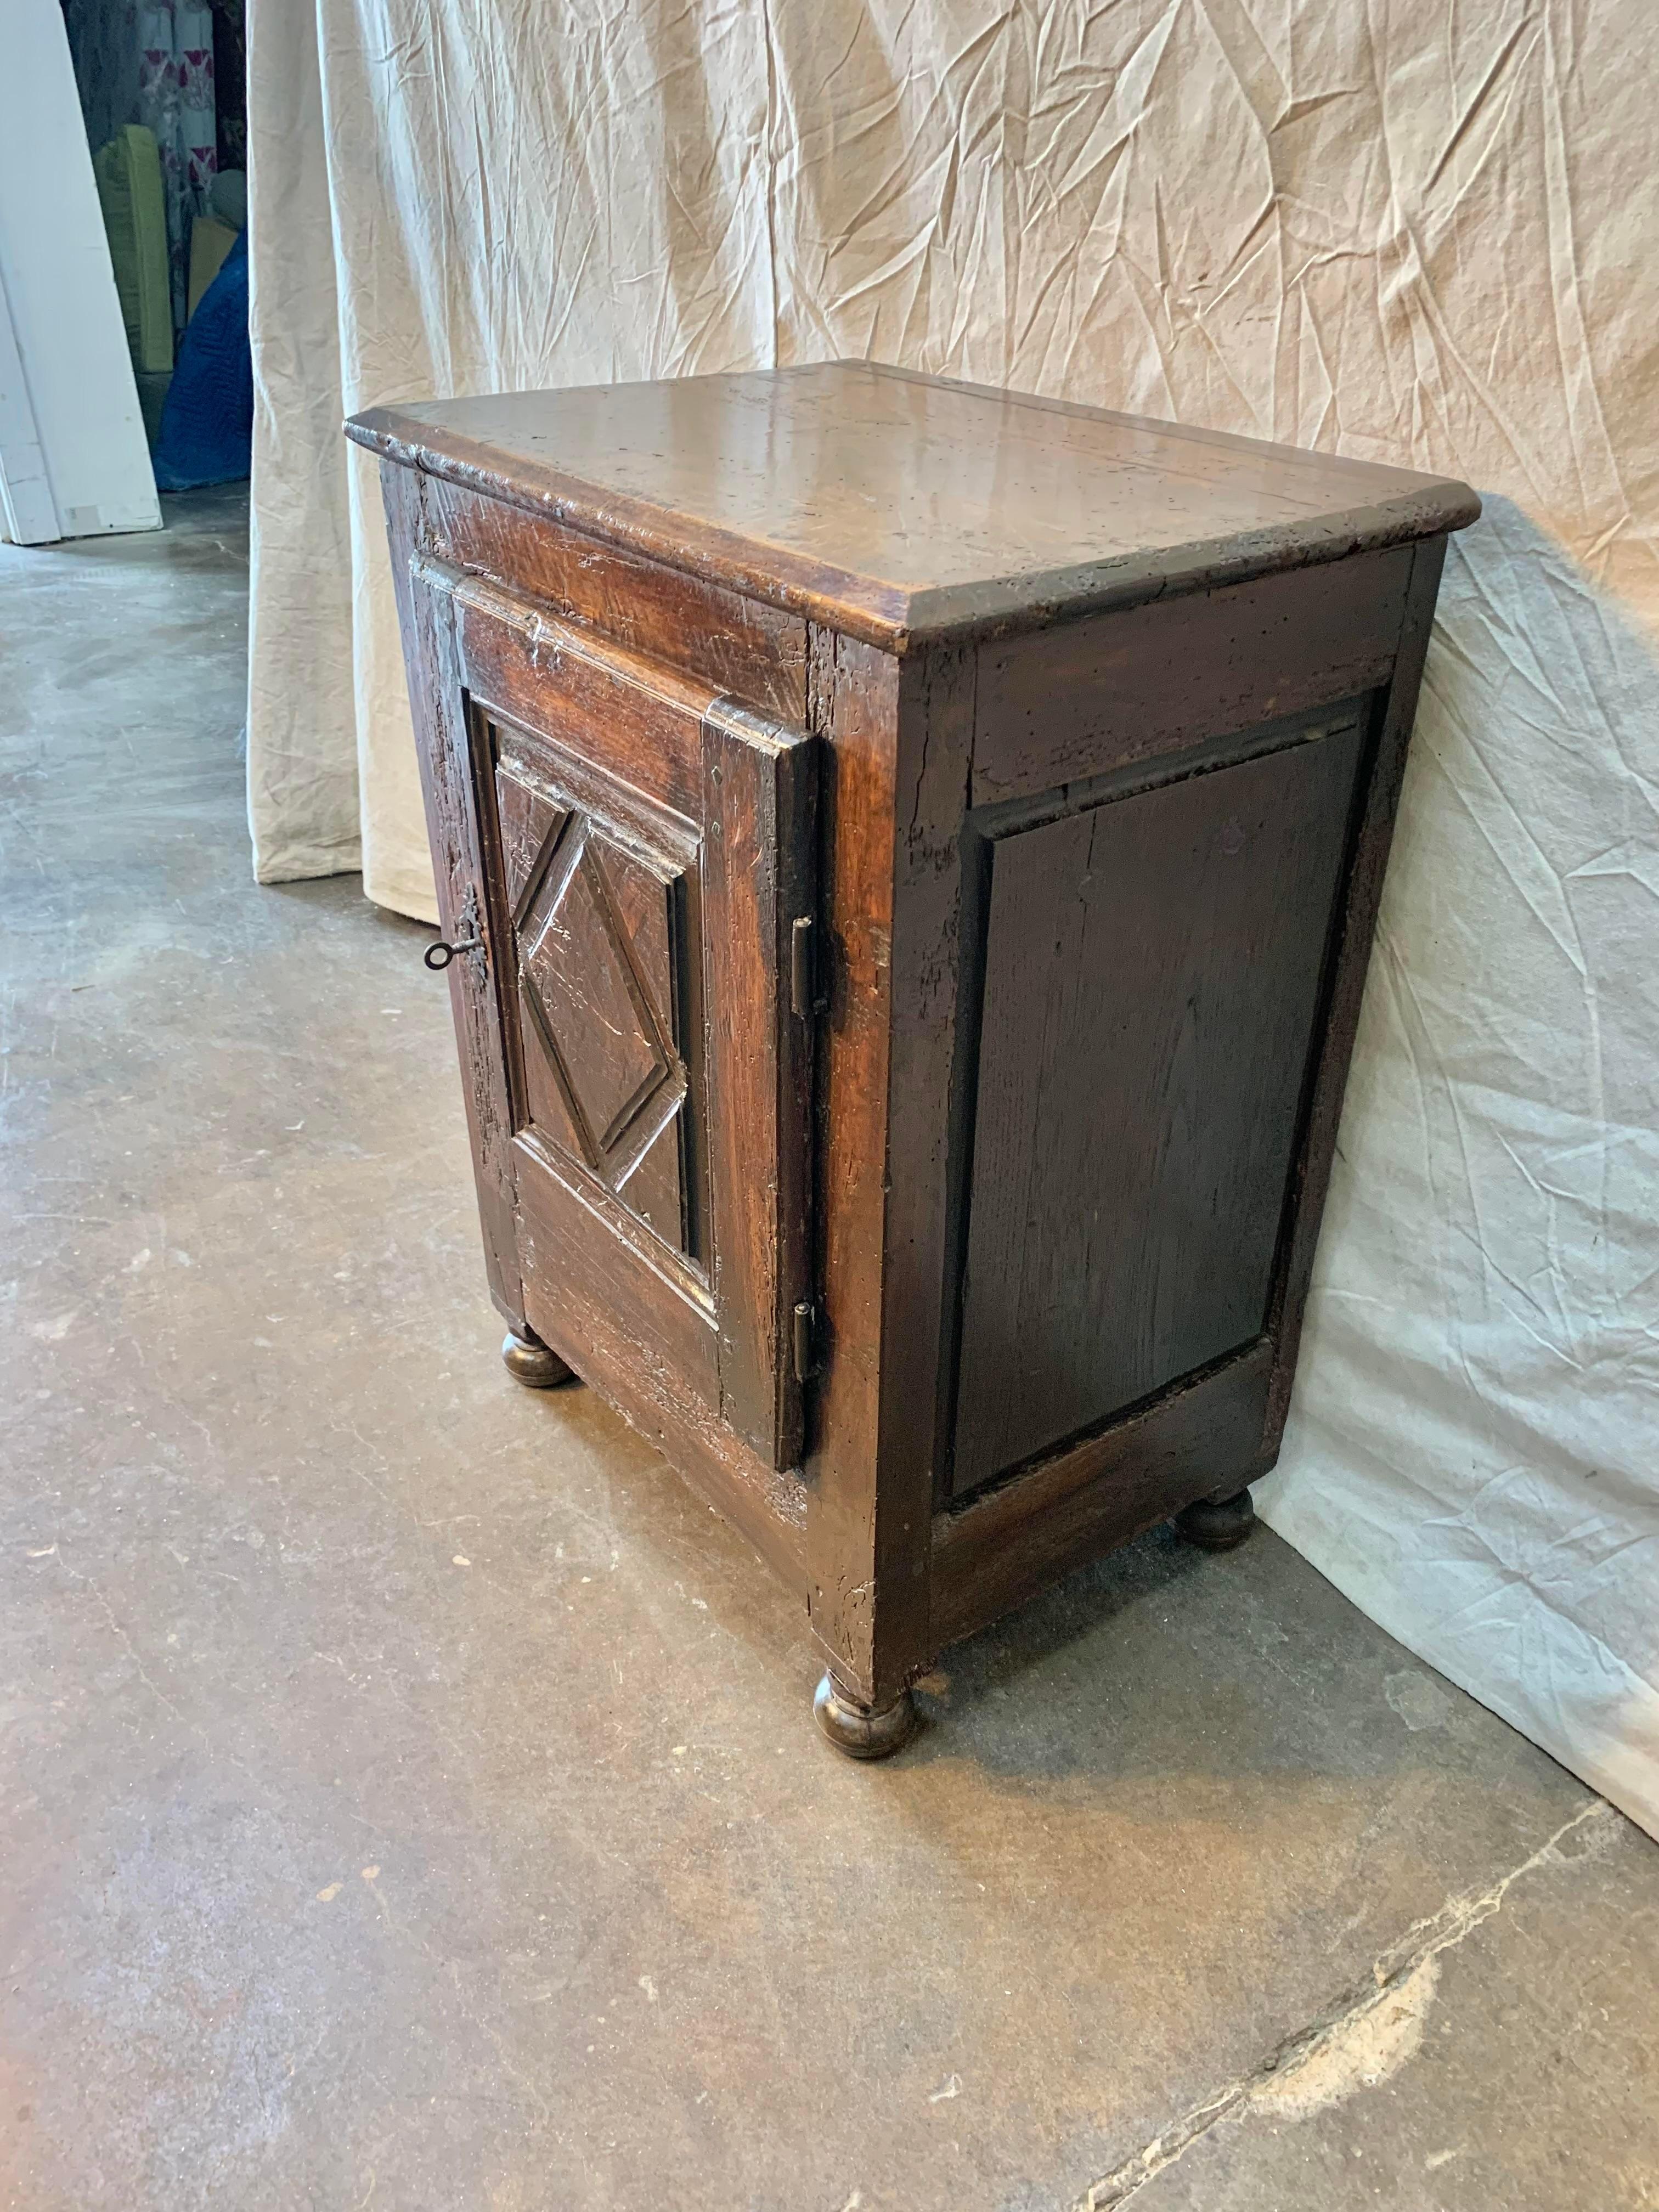 Found in the South of France, this 18th century French Louis XIII Style Cabinet De Confiture or jam cabinet was handcrafted of solid old growth oak. The piece features a beveled edge top resting over a single panel door carved in the typical Louis